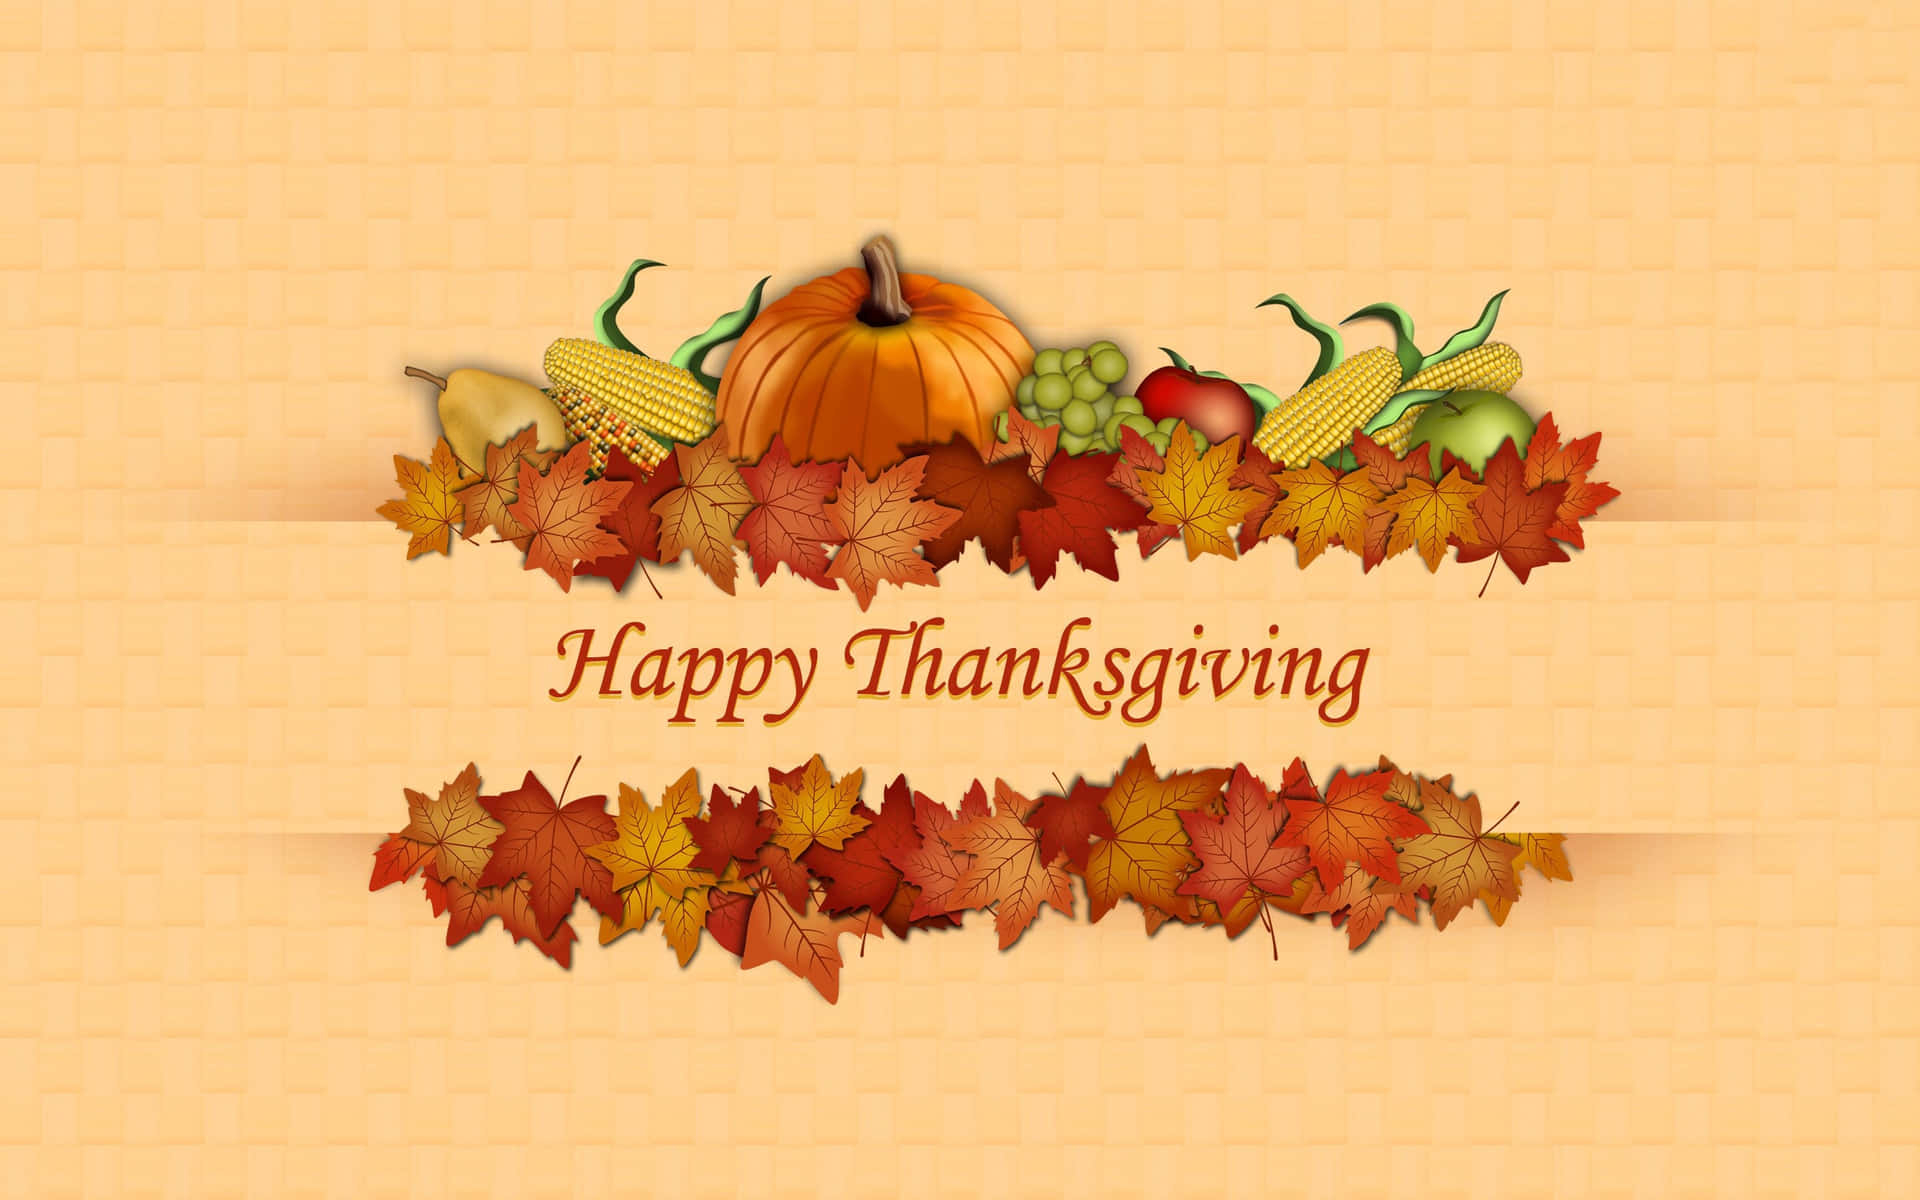 Pumpkins And Maple Leaves Happy Thanksgiving Card Background